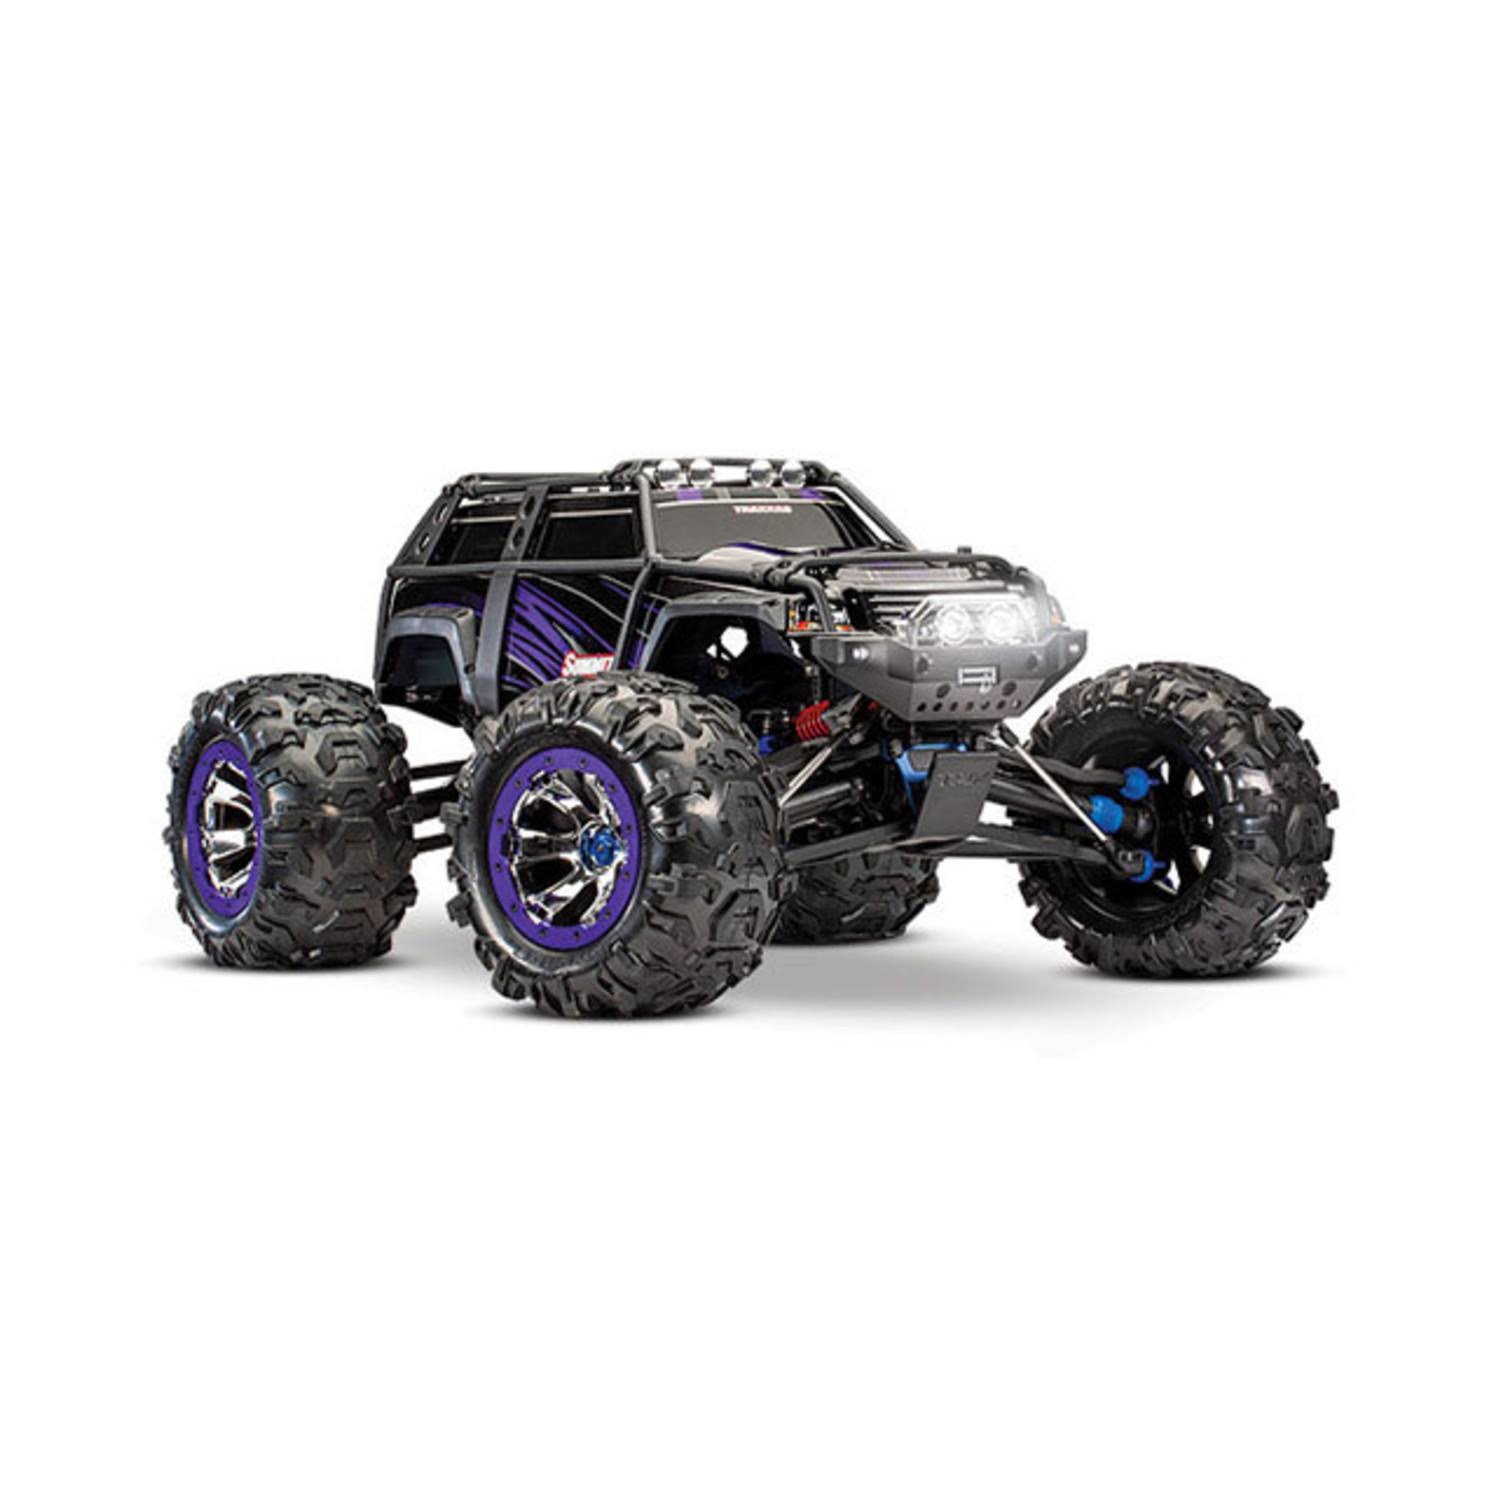 Traxxas 56076-4 Summit 1/10 4WD Electric RC Monster Truck (Purple)